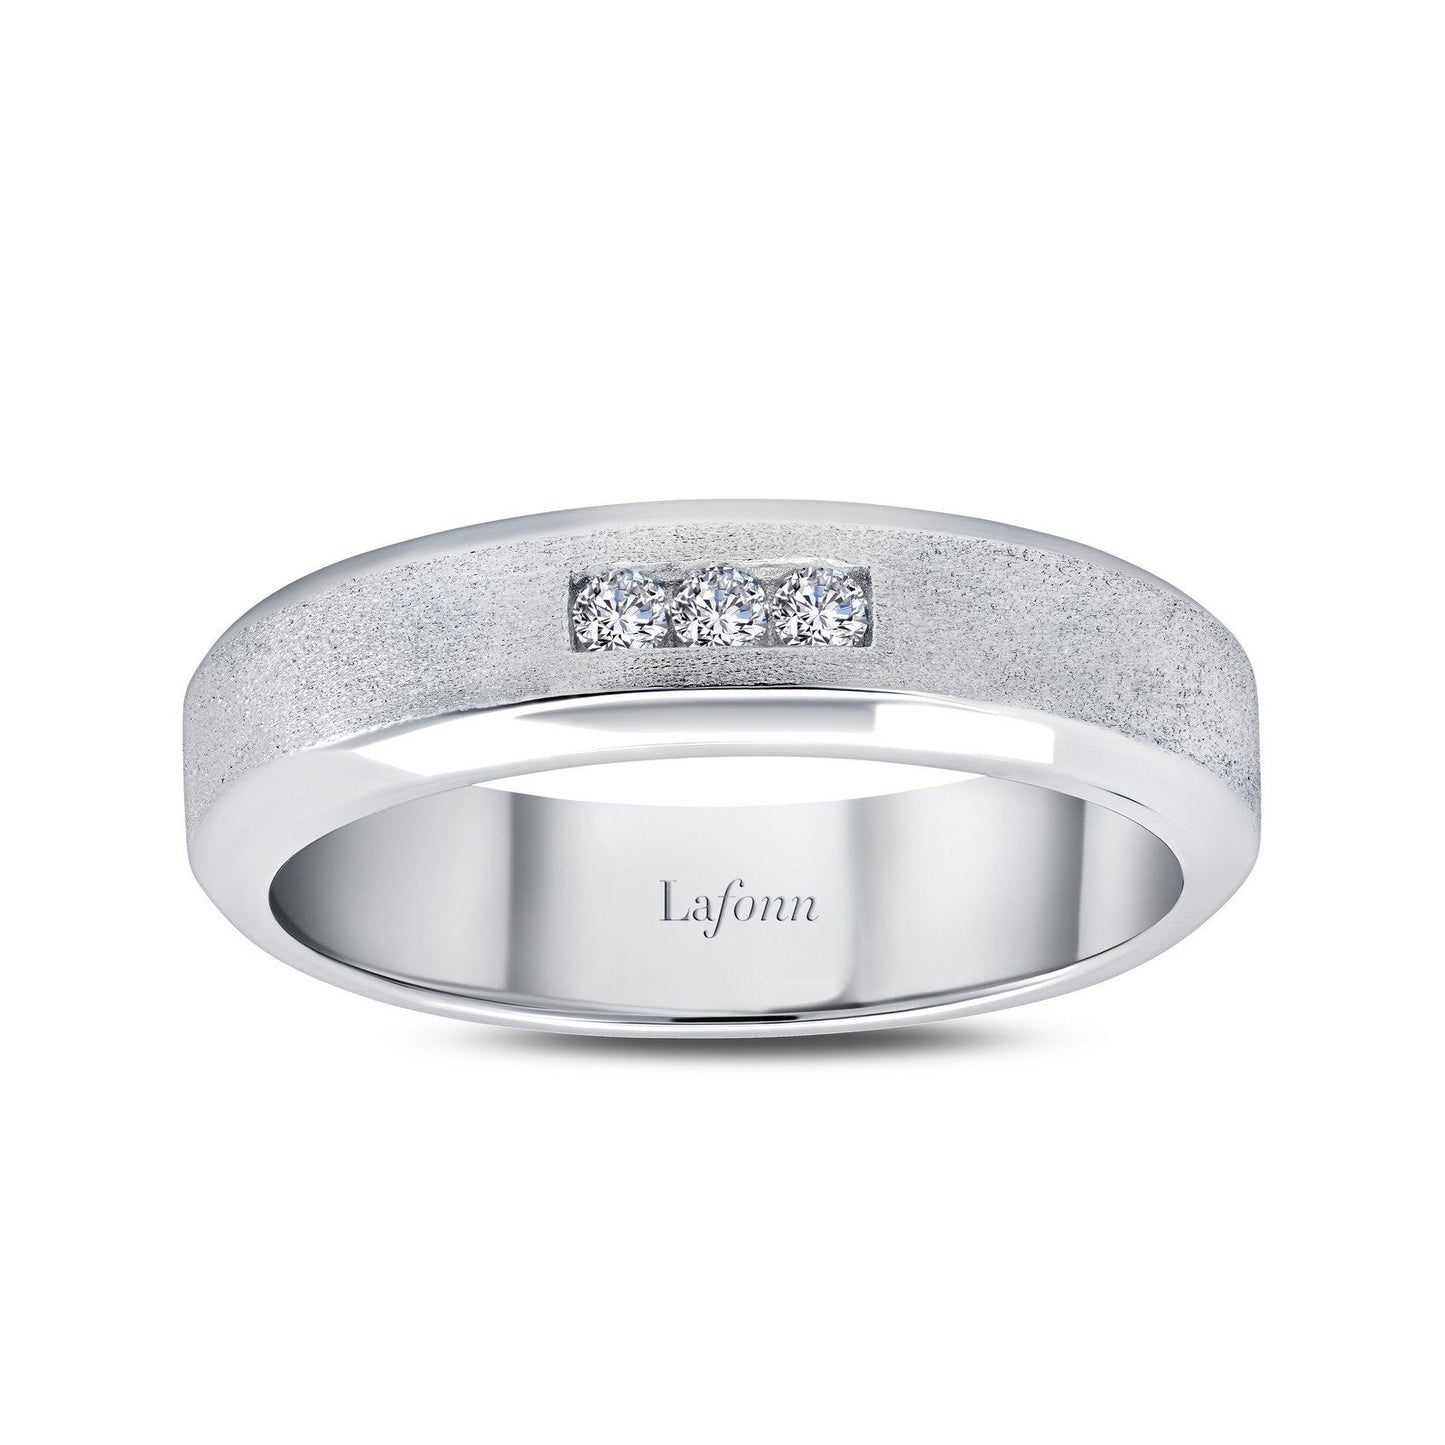 Lafonn 0.09 CTW Men's Wedding Band Simulated Diamond RINGS Size 12 Platinum 0.09 CTS Approx. 5.4mm (W)